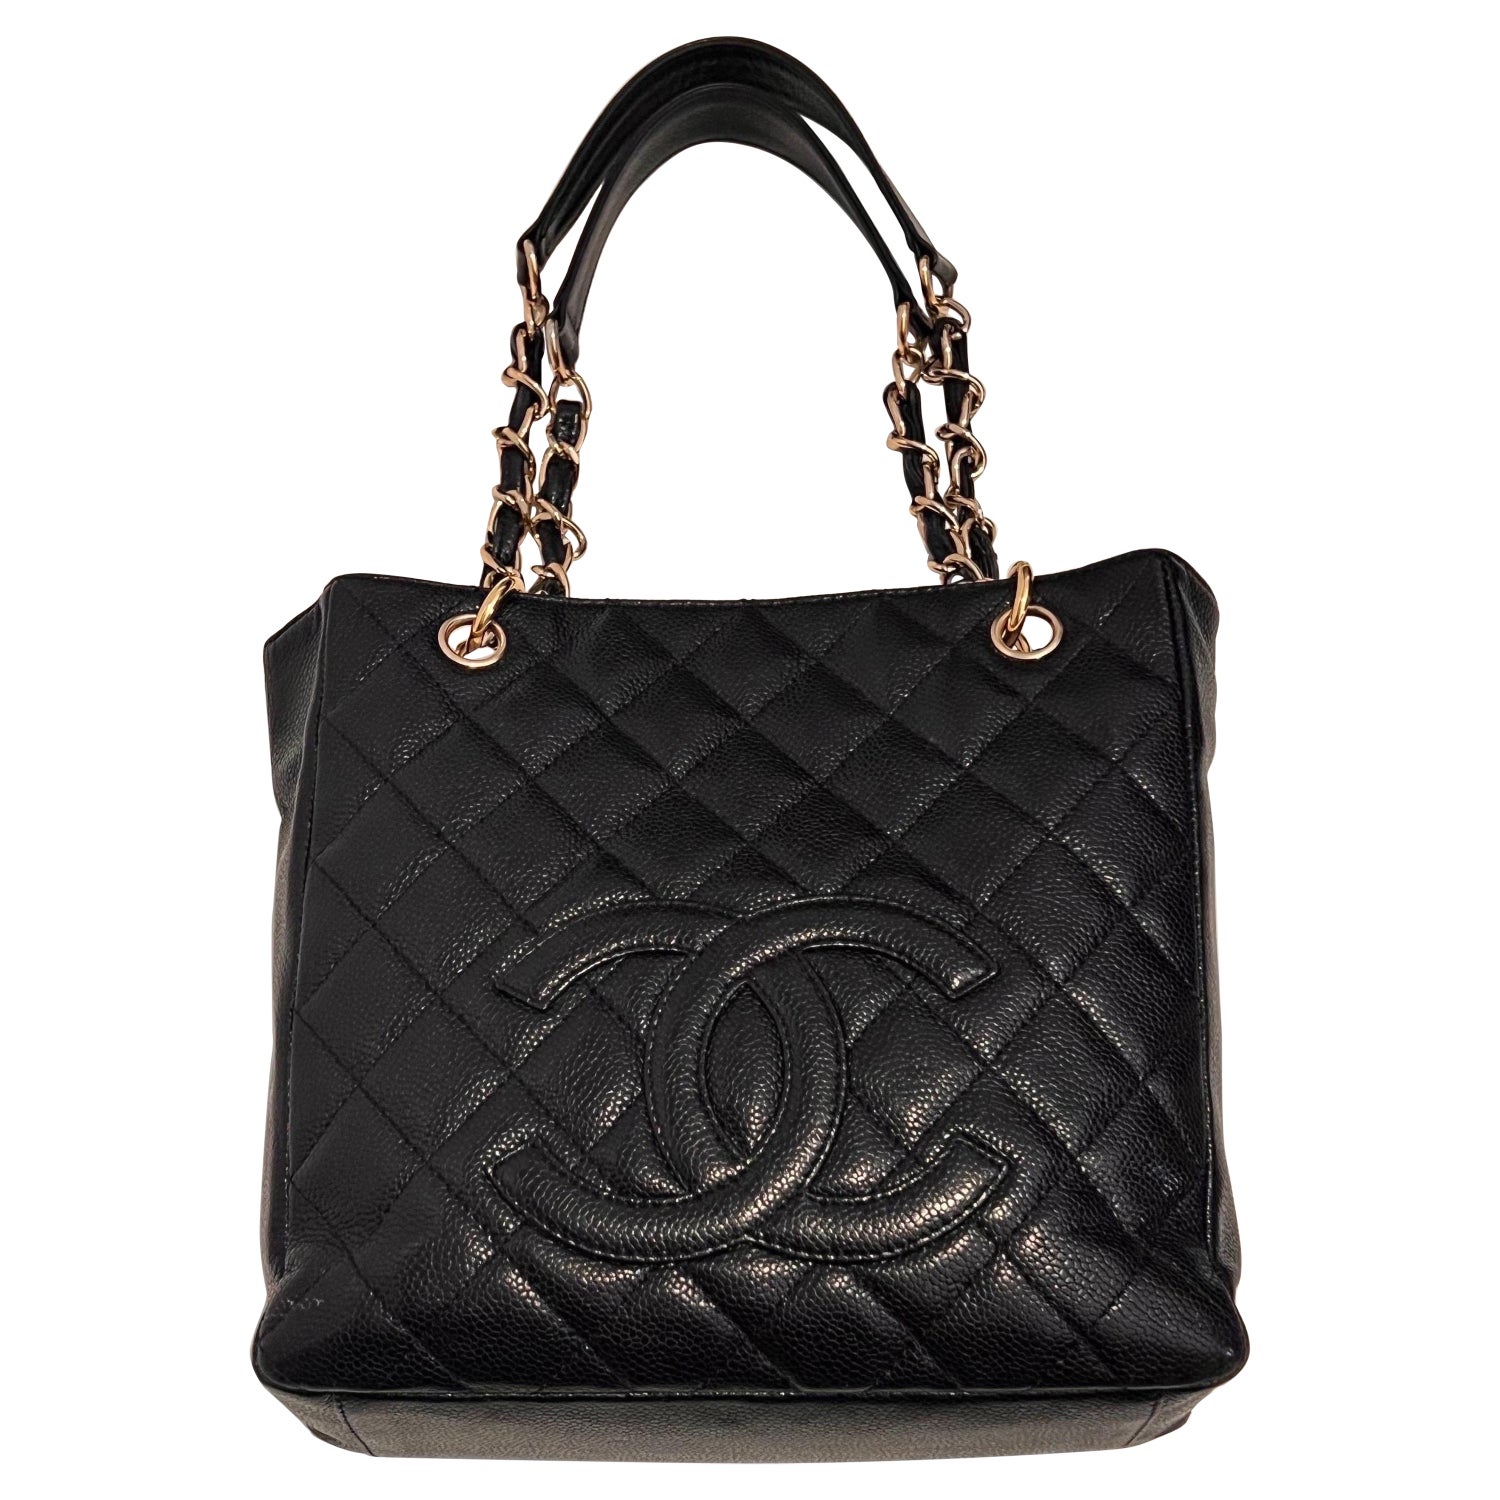 Chanel Black Vintage Patent GST Grand Shopping Tote Bag Chanel